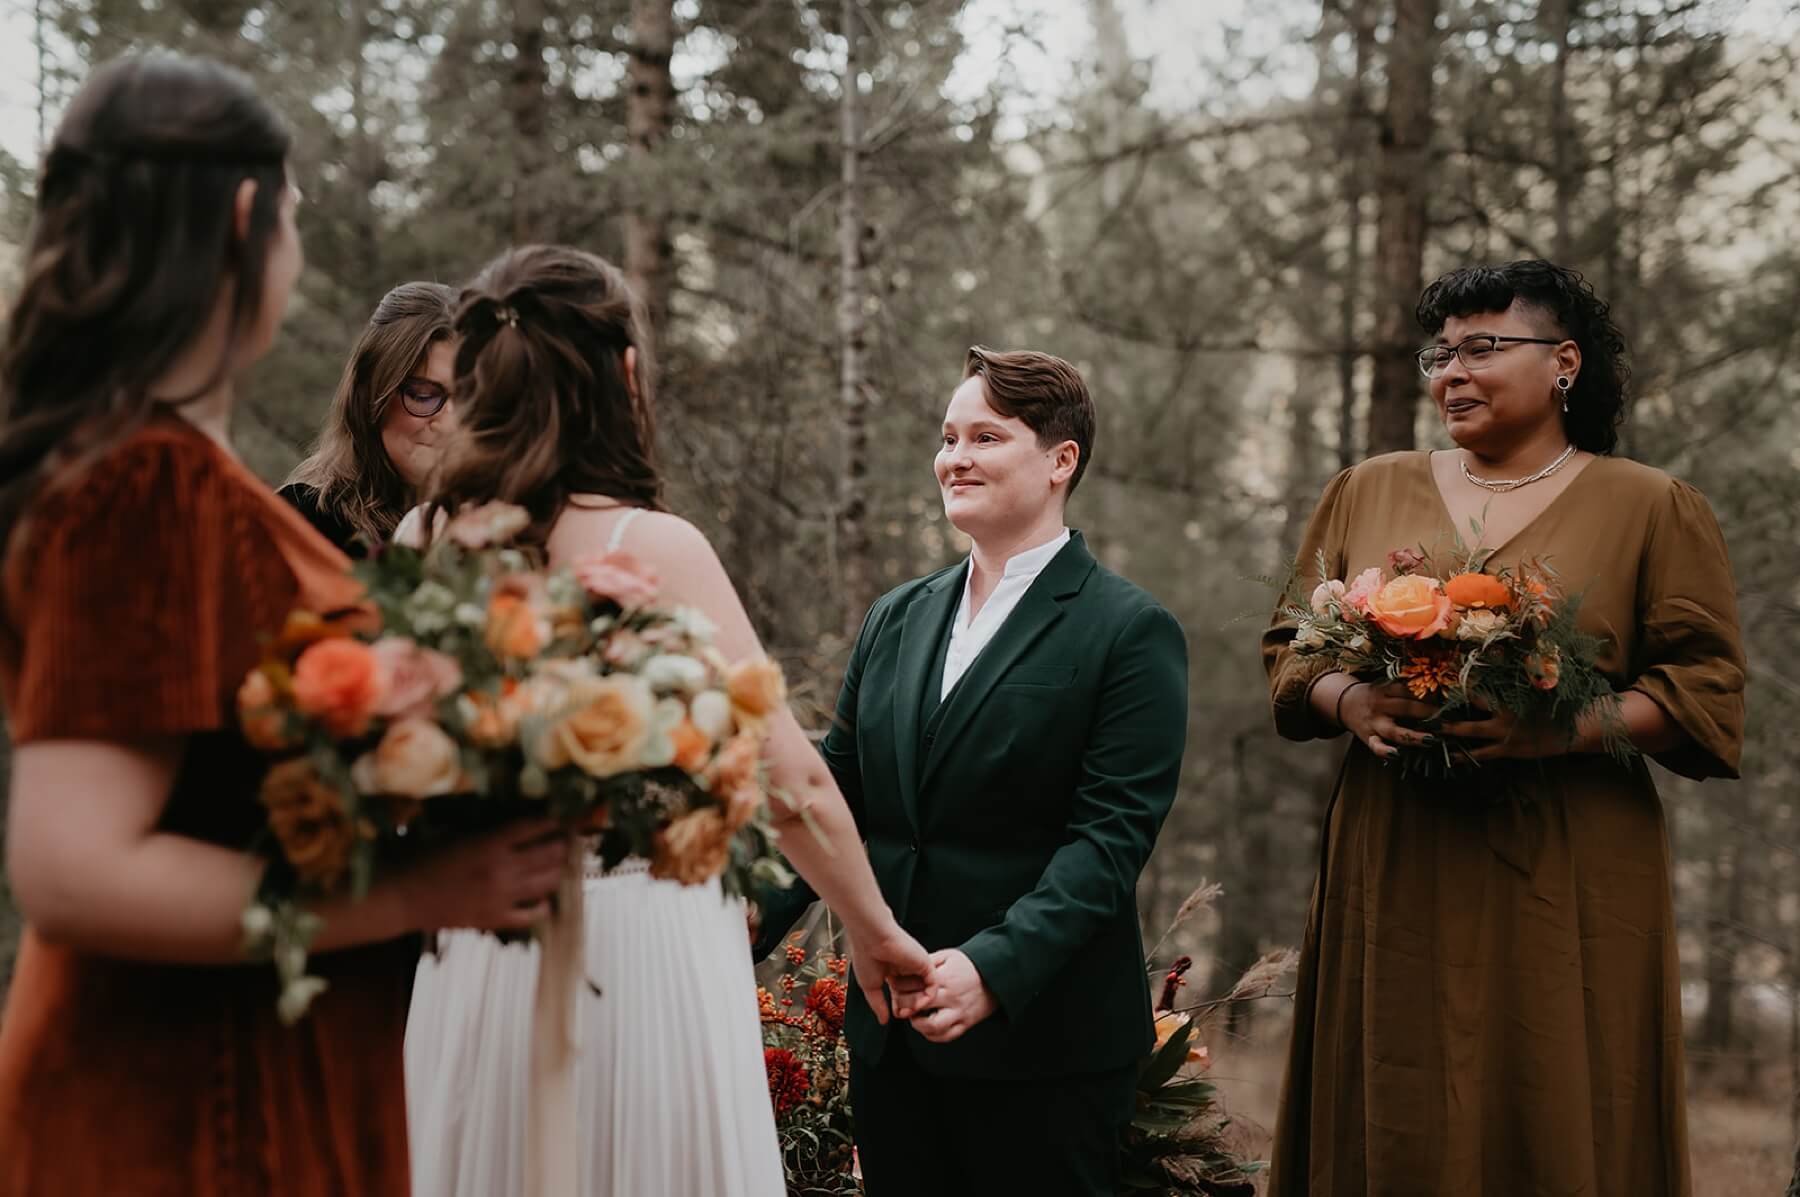 Couple holding hands and exchanging vows as maid of honor looks on